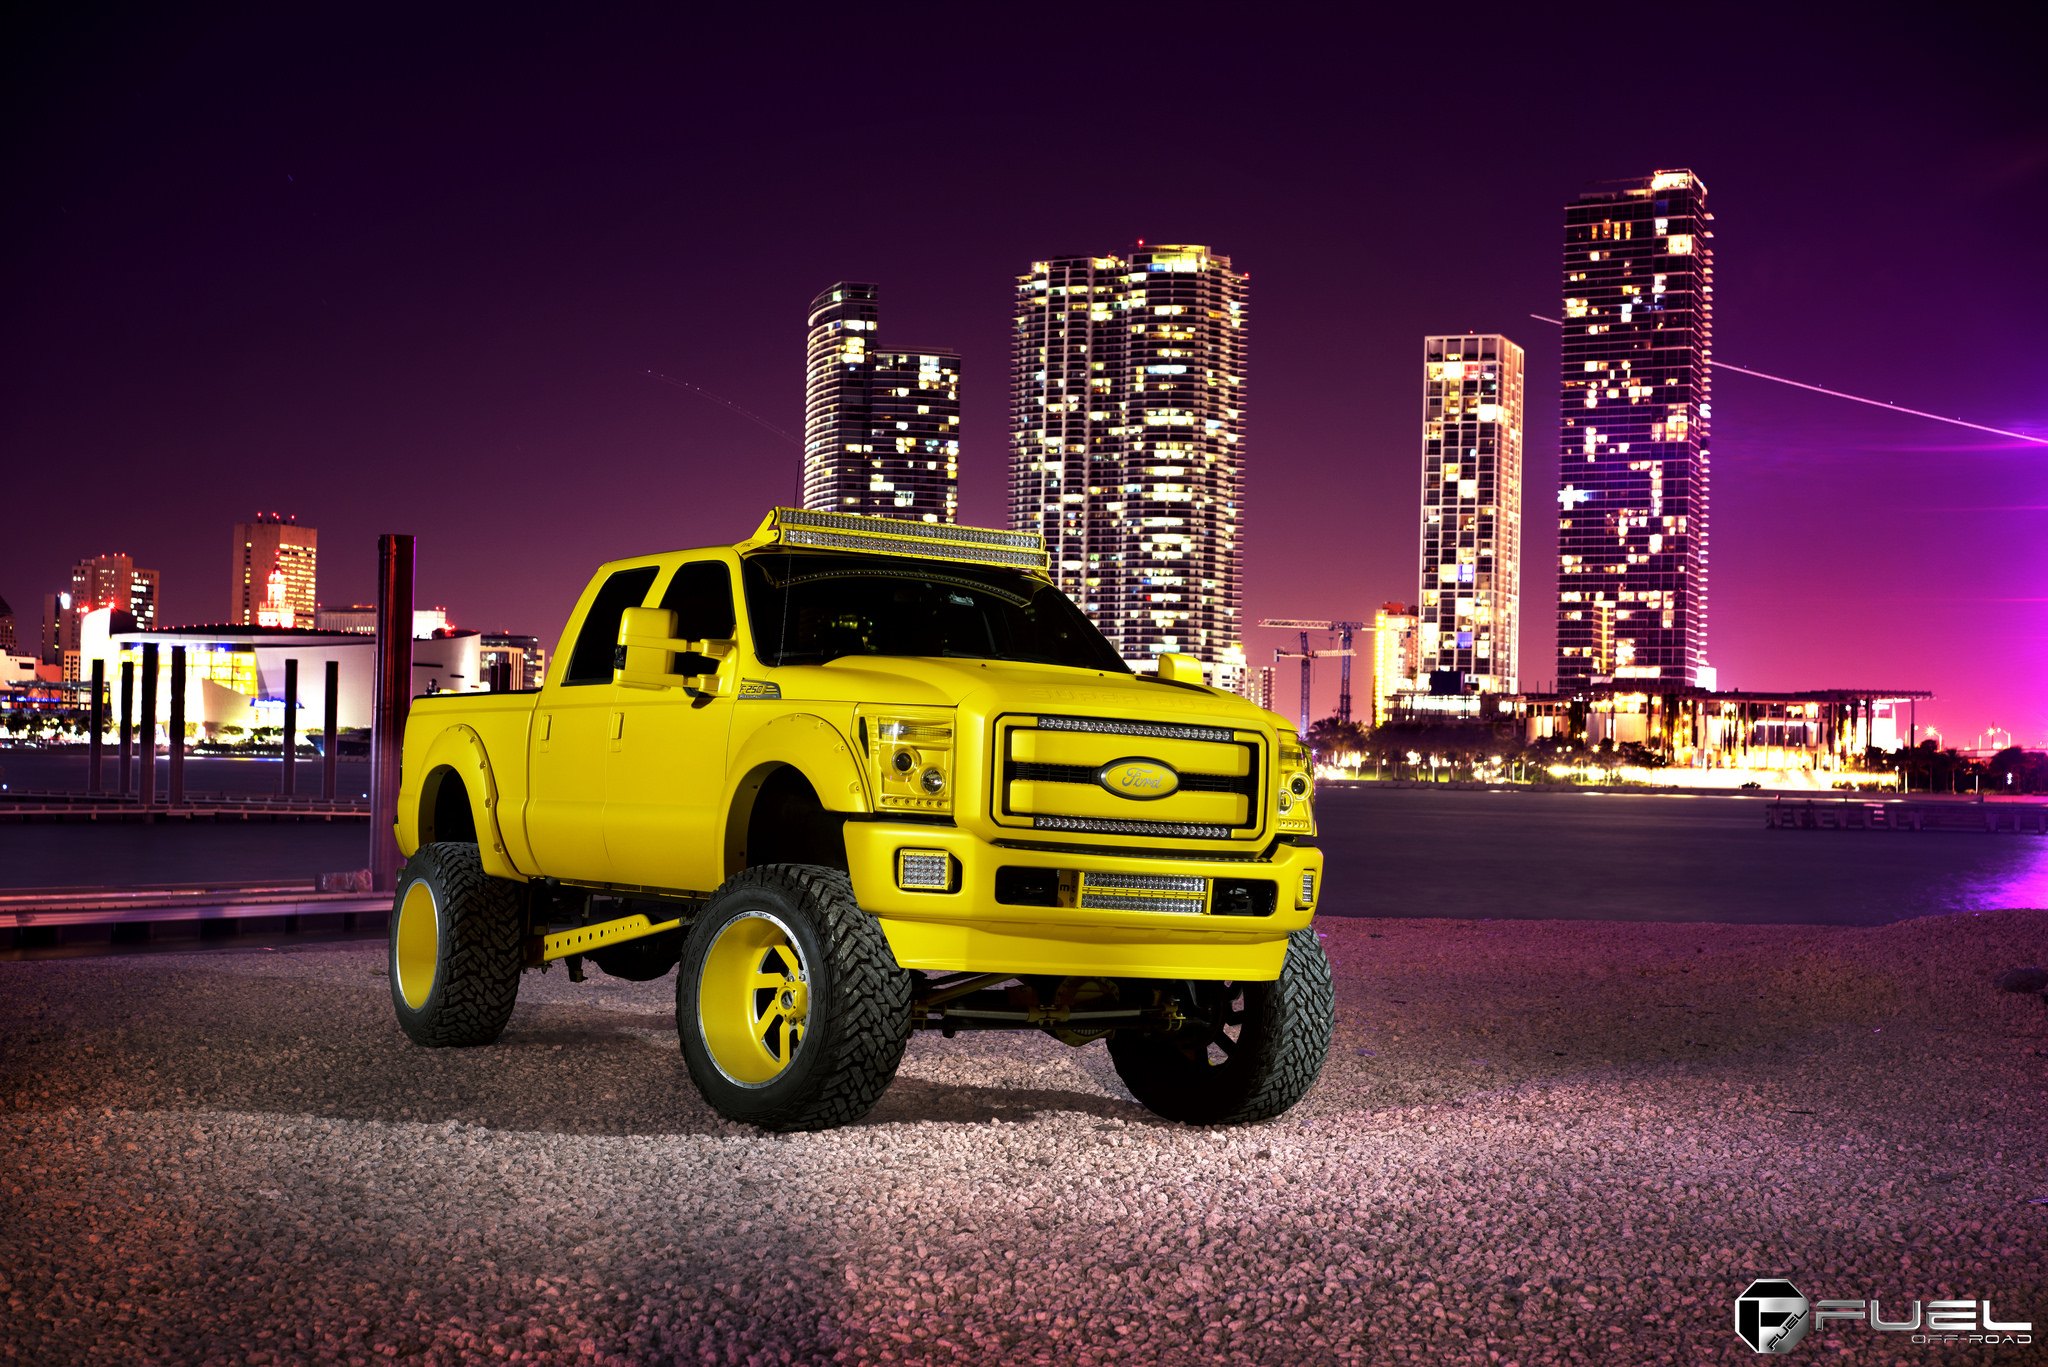 Aftermarket Front Bumper on Yellow Lifted Ford F-250 - Photo by Fuel Offroad